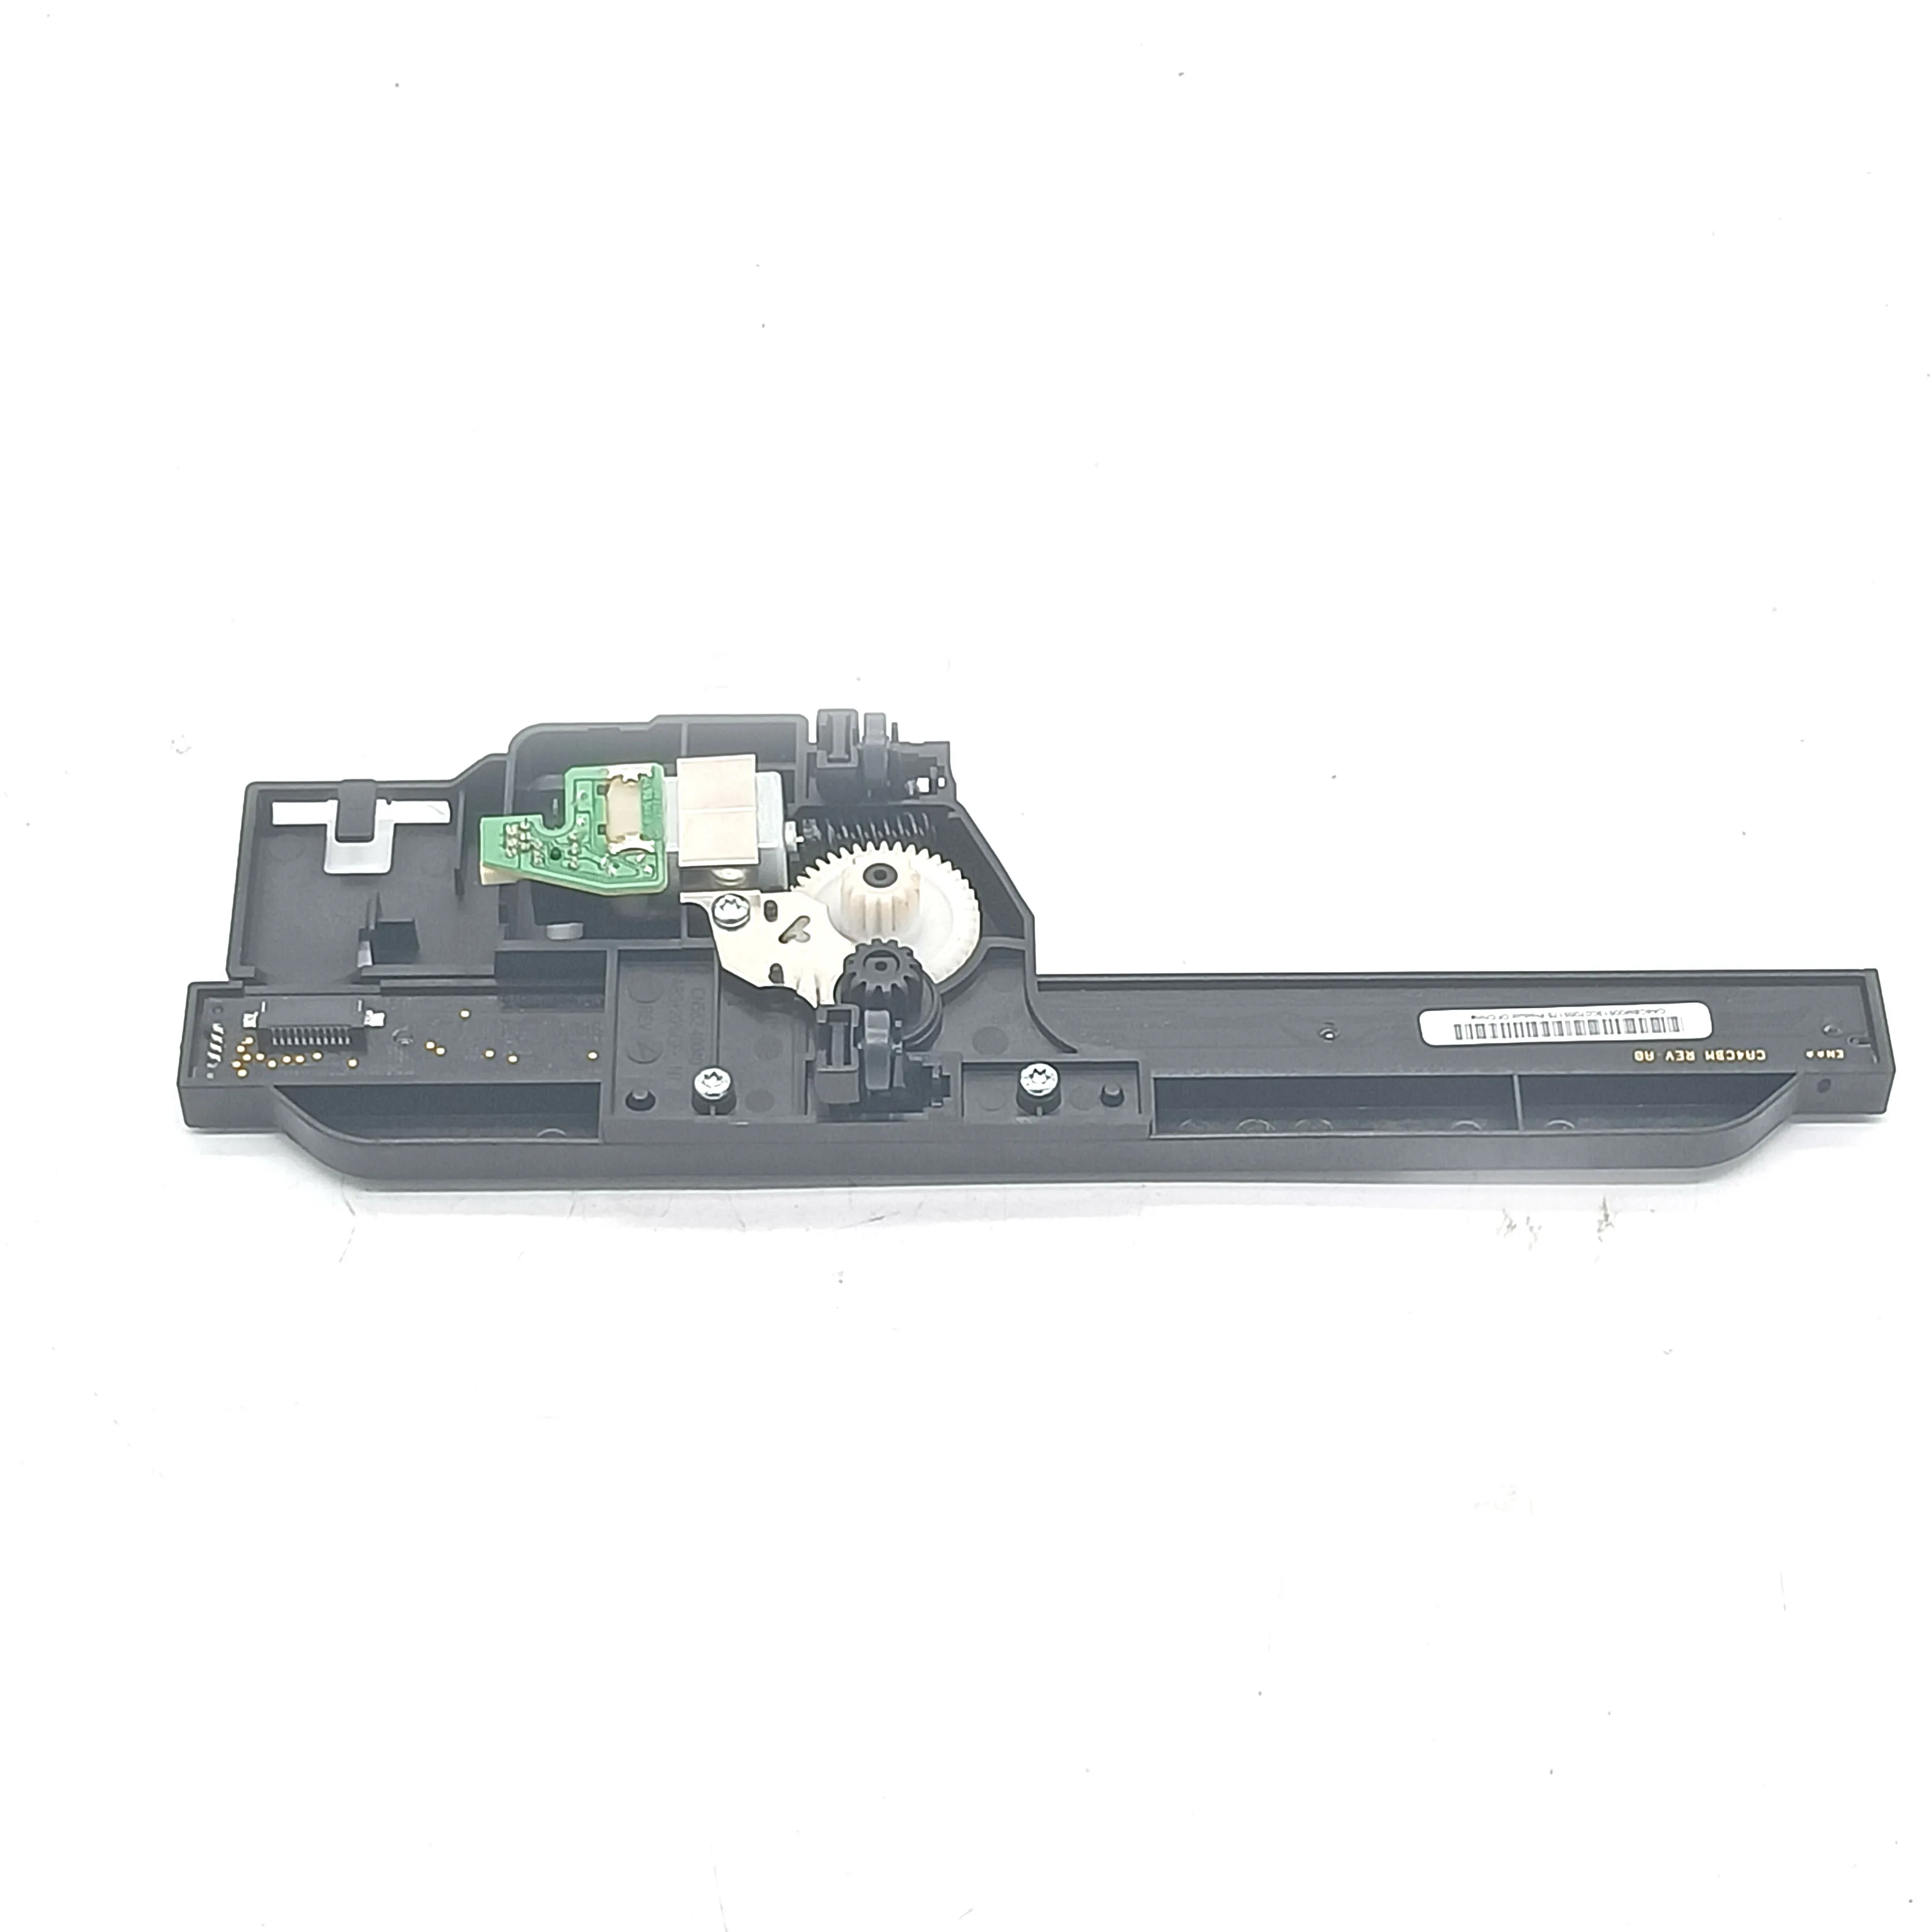 

Scanner Head 4610 Fits For HP 4625 5510 3522 3070A 3521 4620 5520 5525 5522 3520 5524 3070 5512 5514 4615 4610 3524 3525